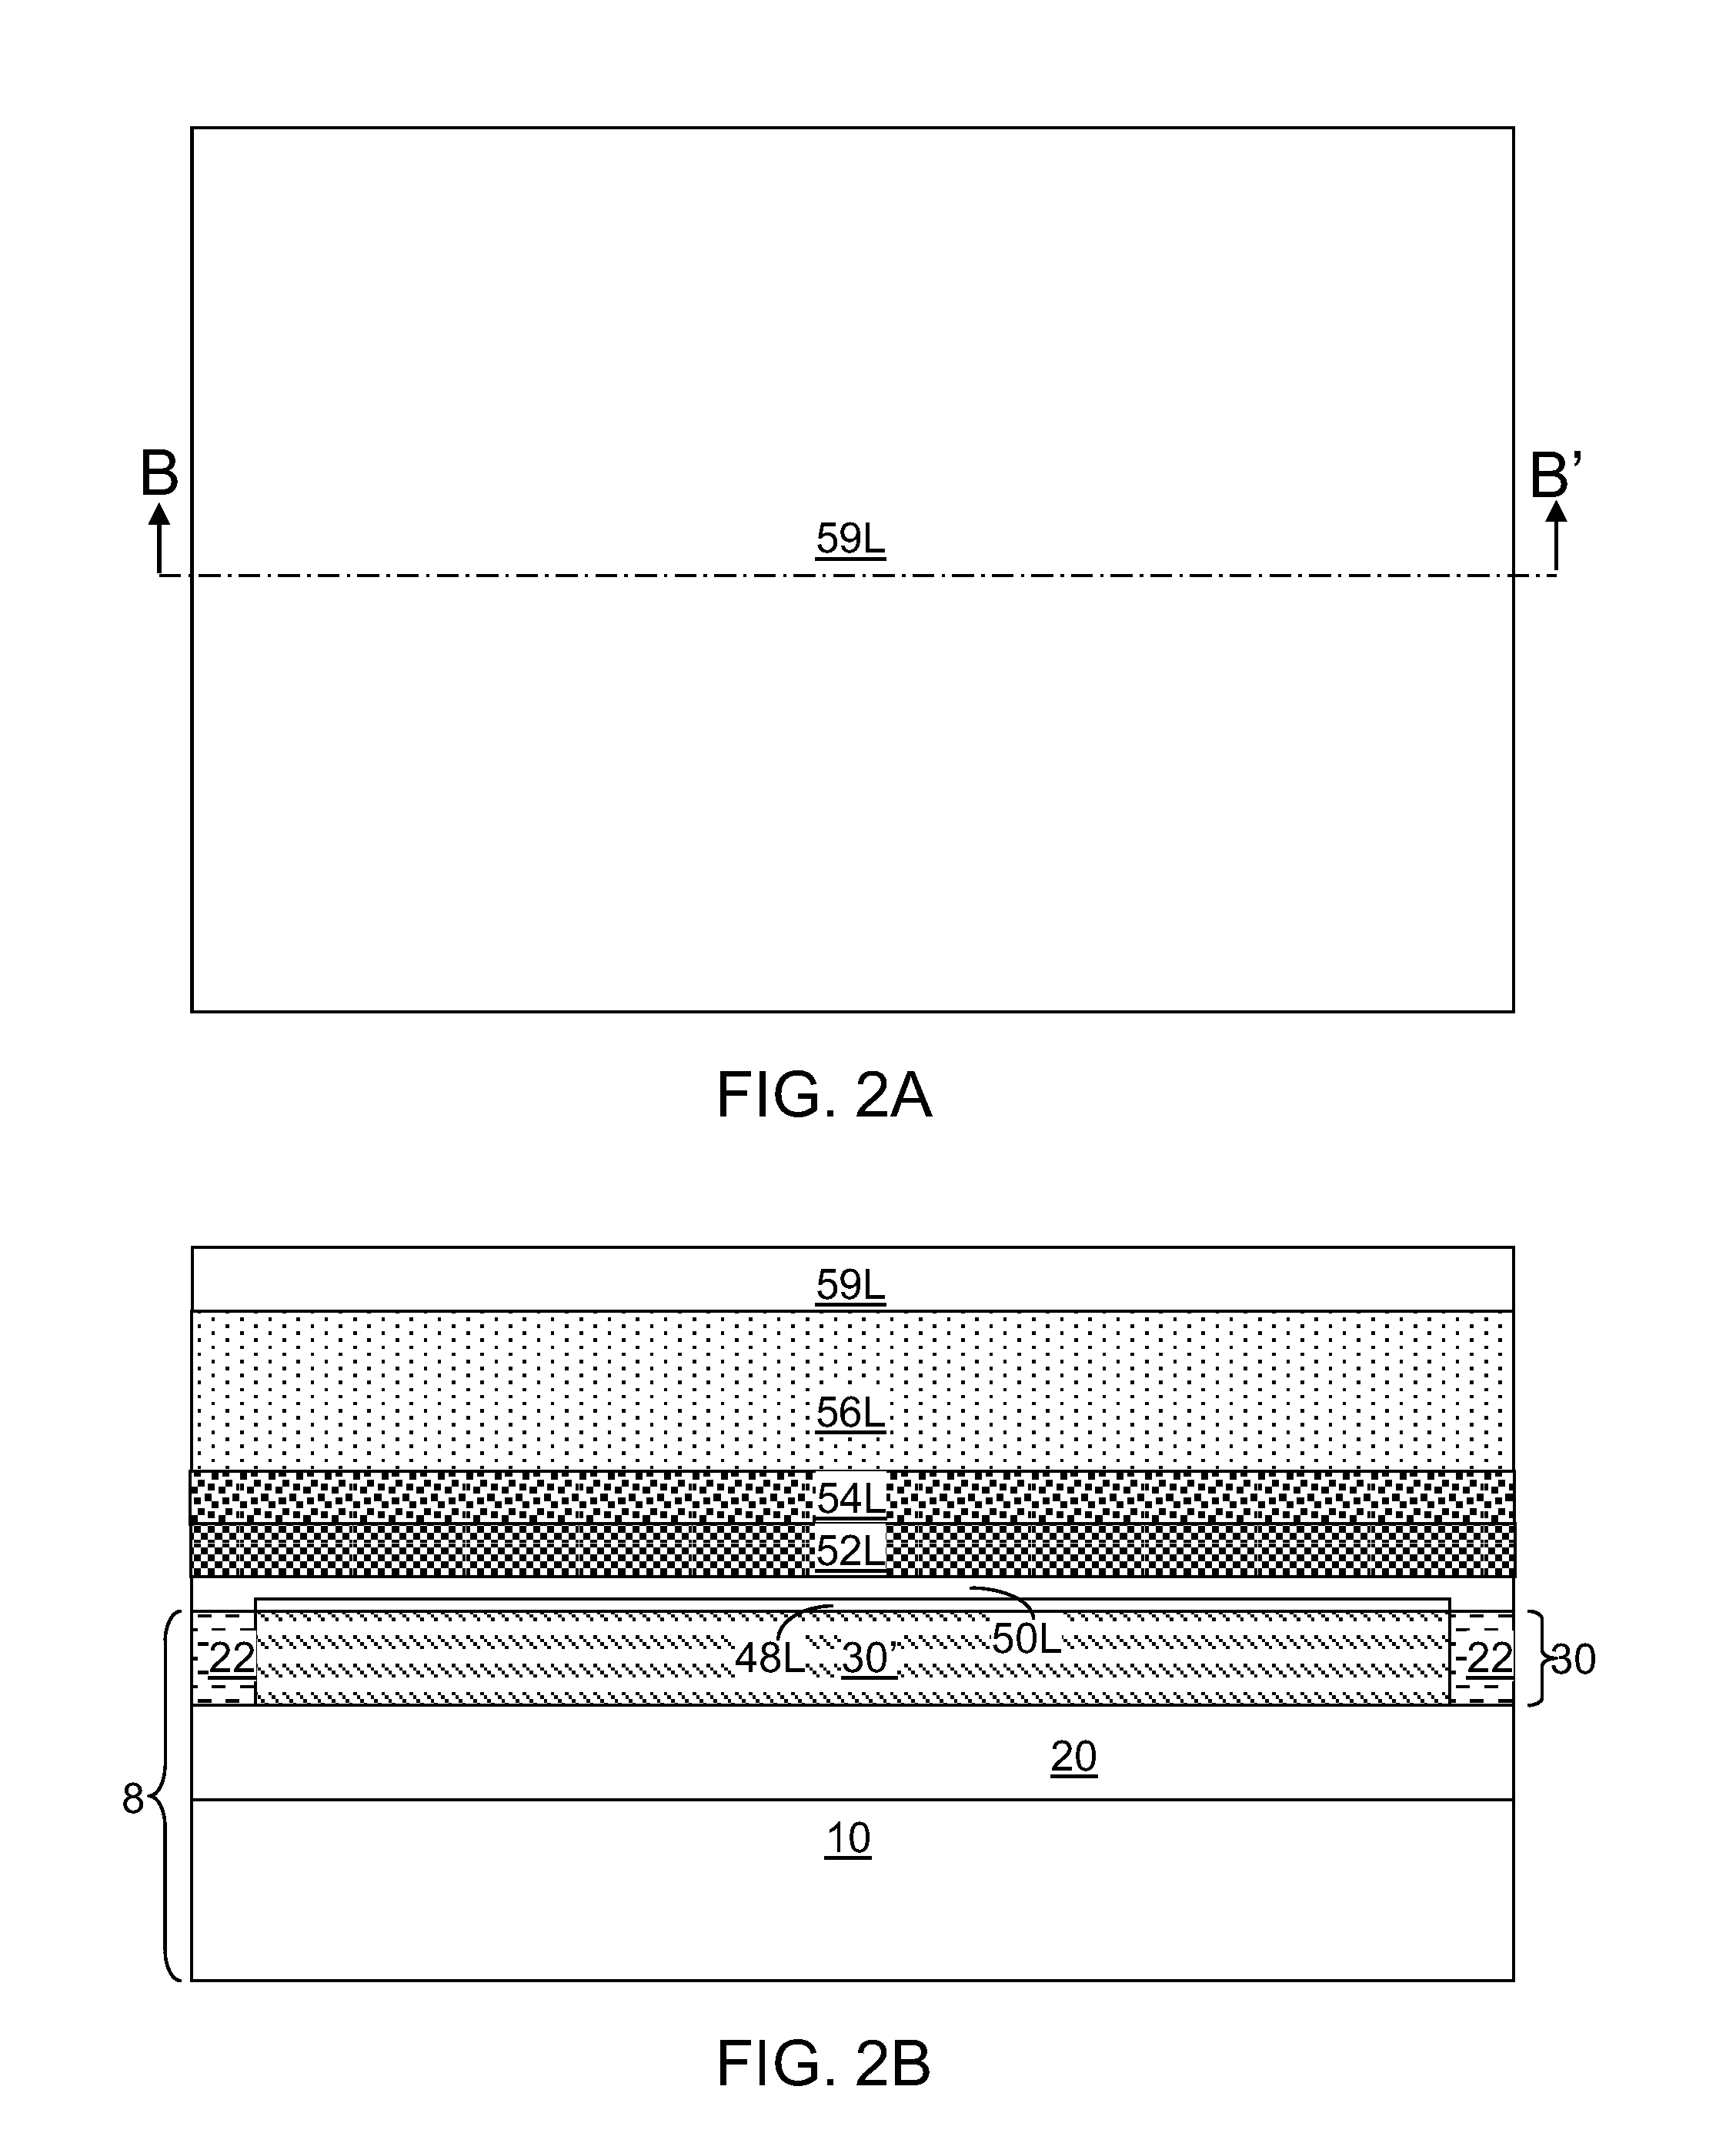 Mosfet gate electrode employing arsenic-doped silicon-germanium alloy layer